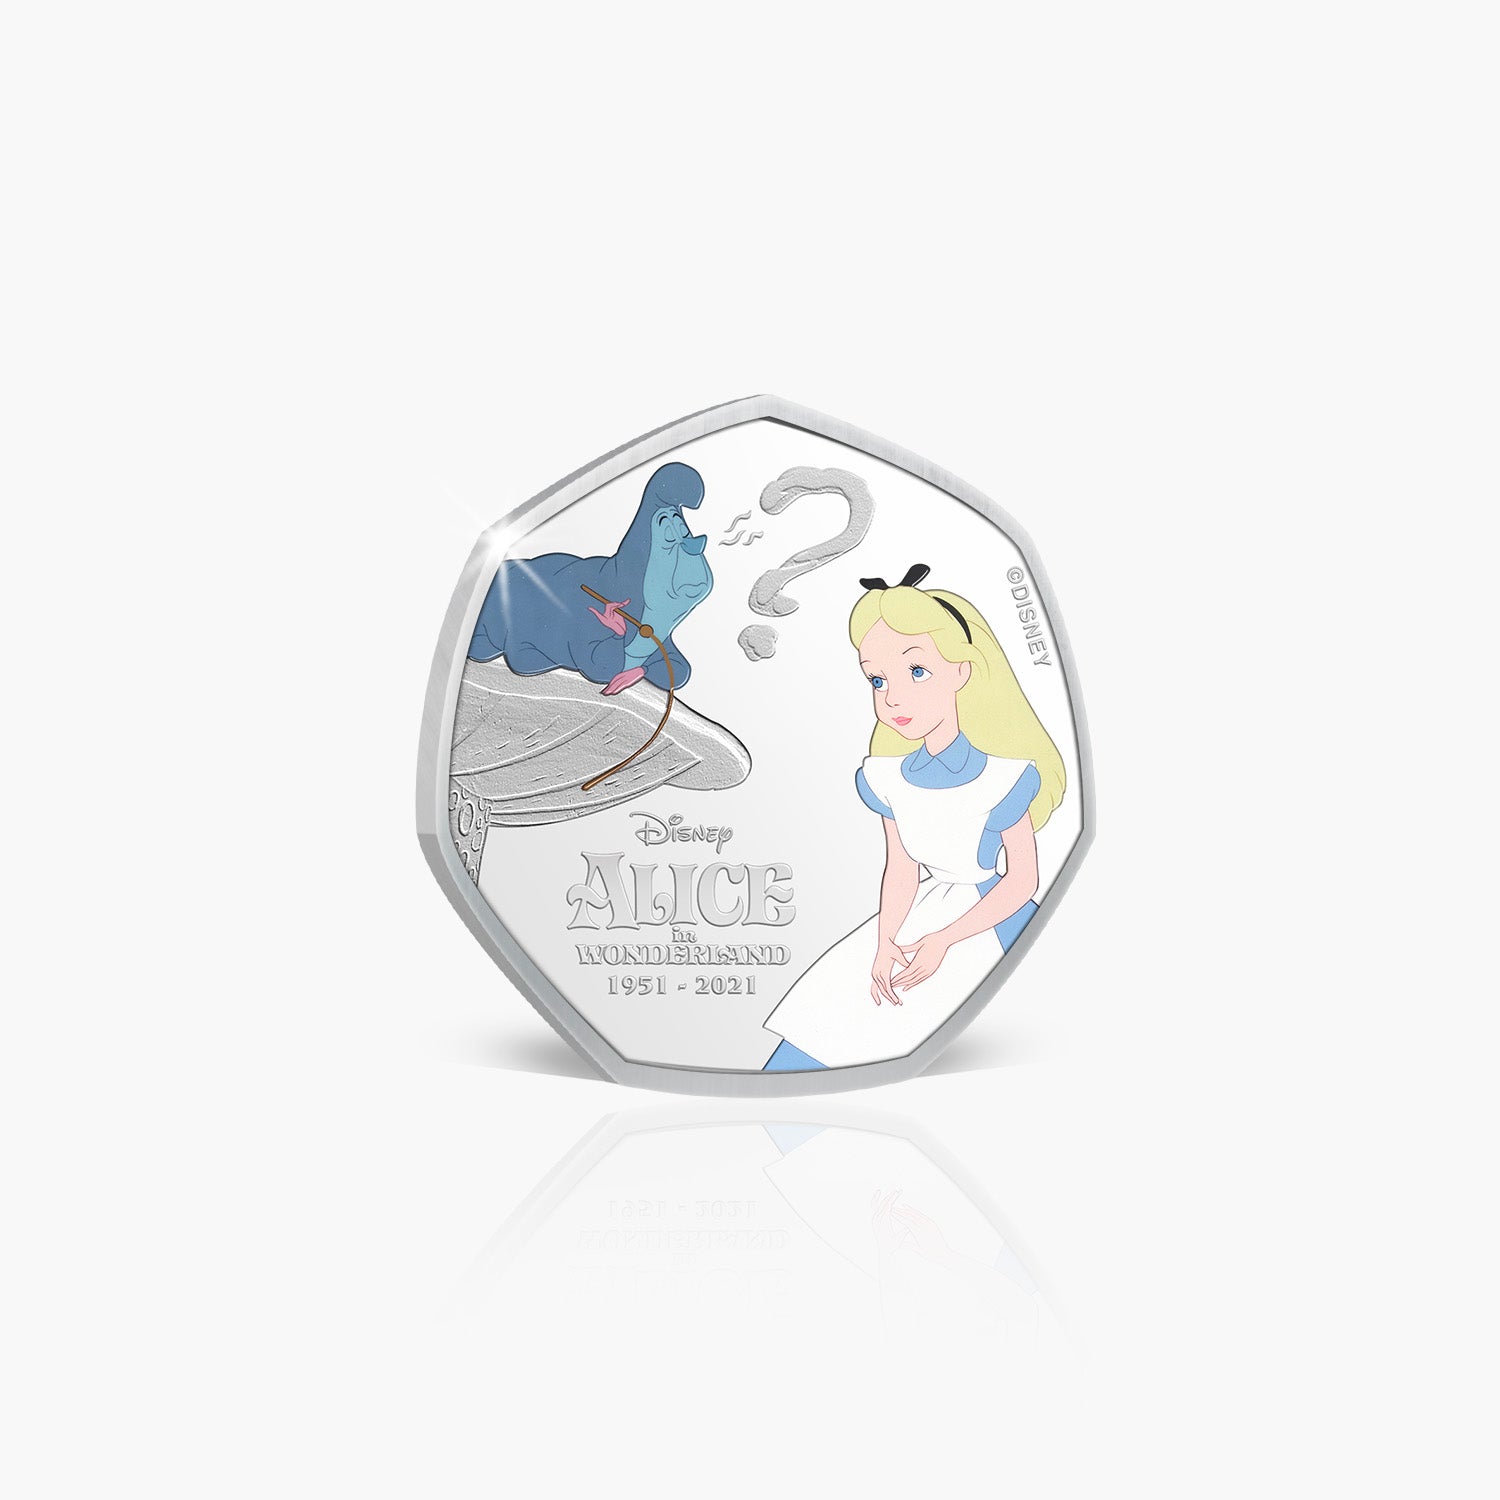 Who Are You Silver Plated Coin